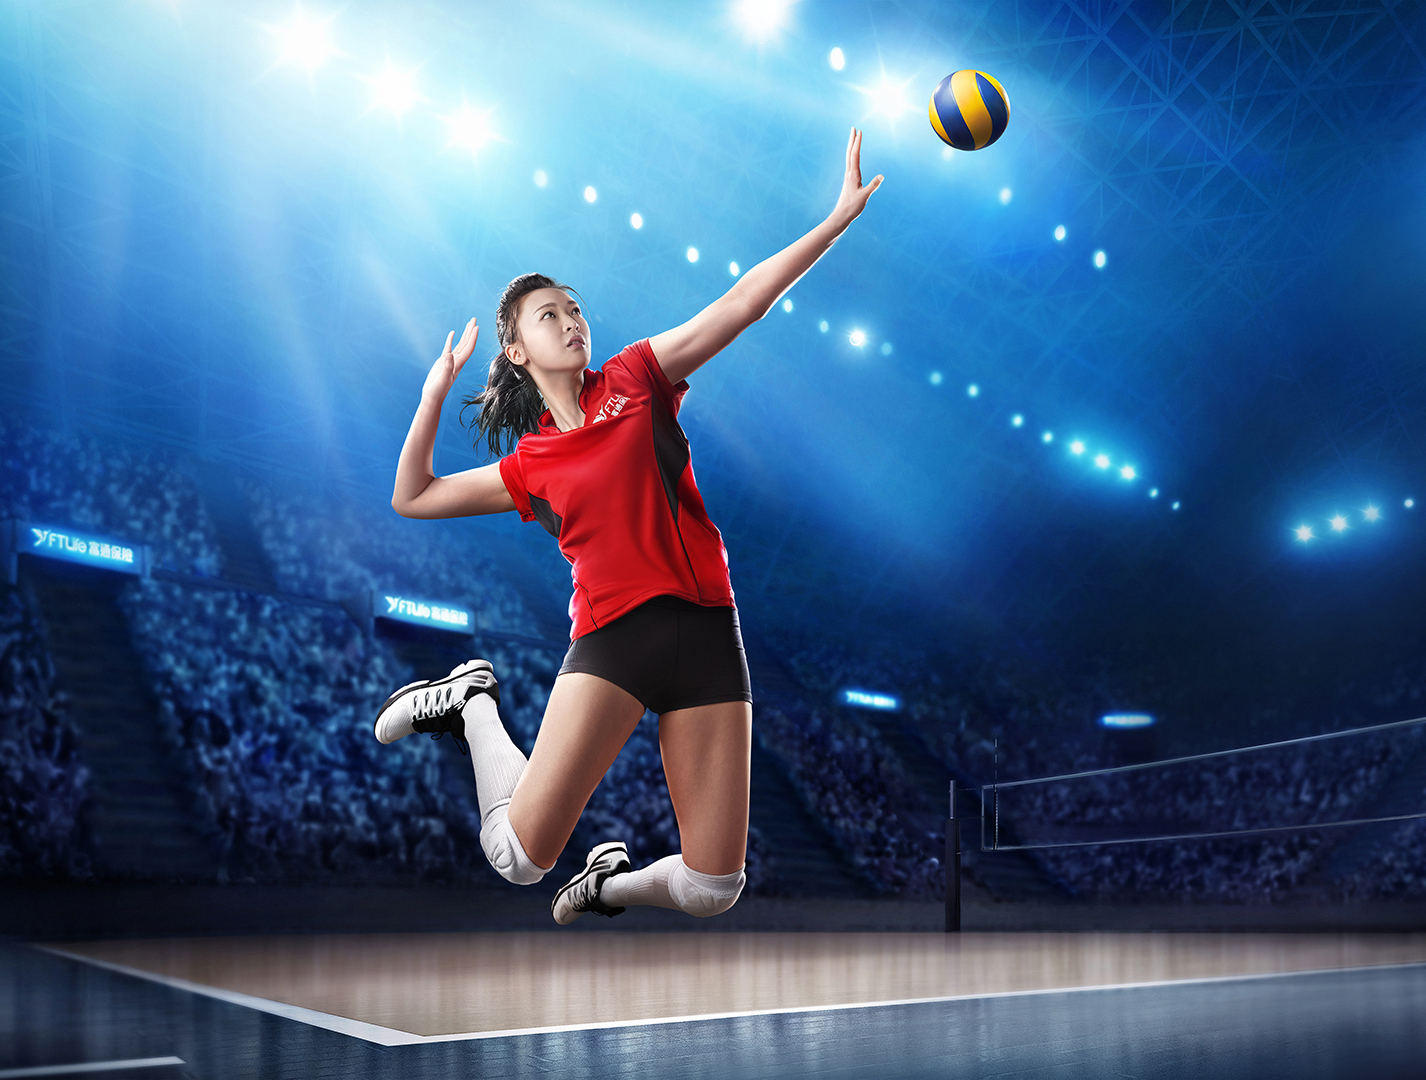 Volleyball: Female player in action - C-Media